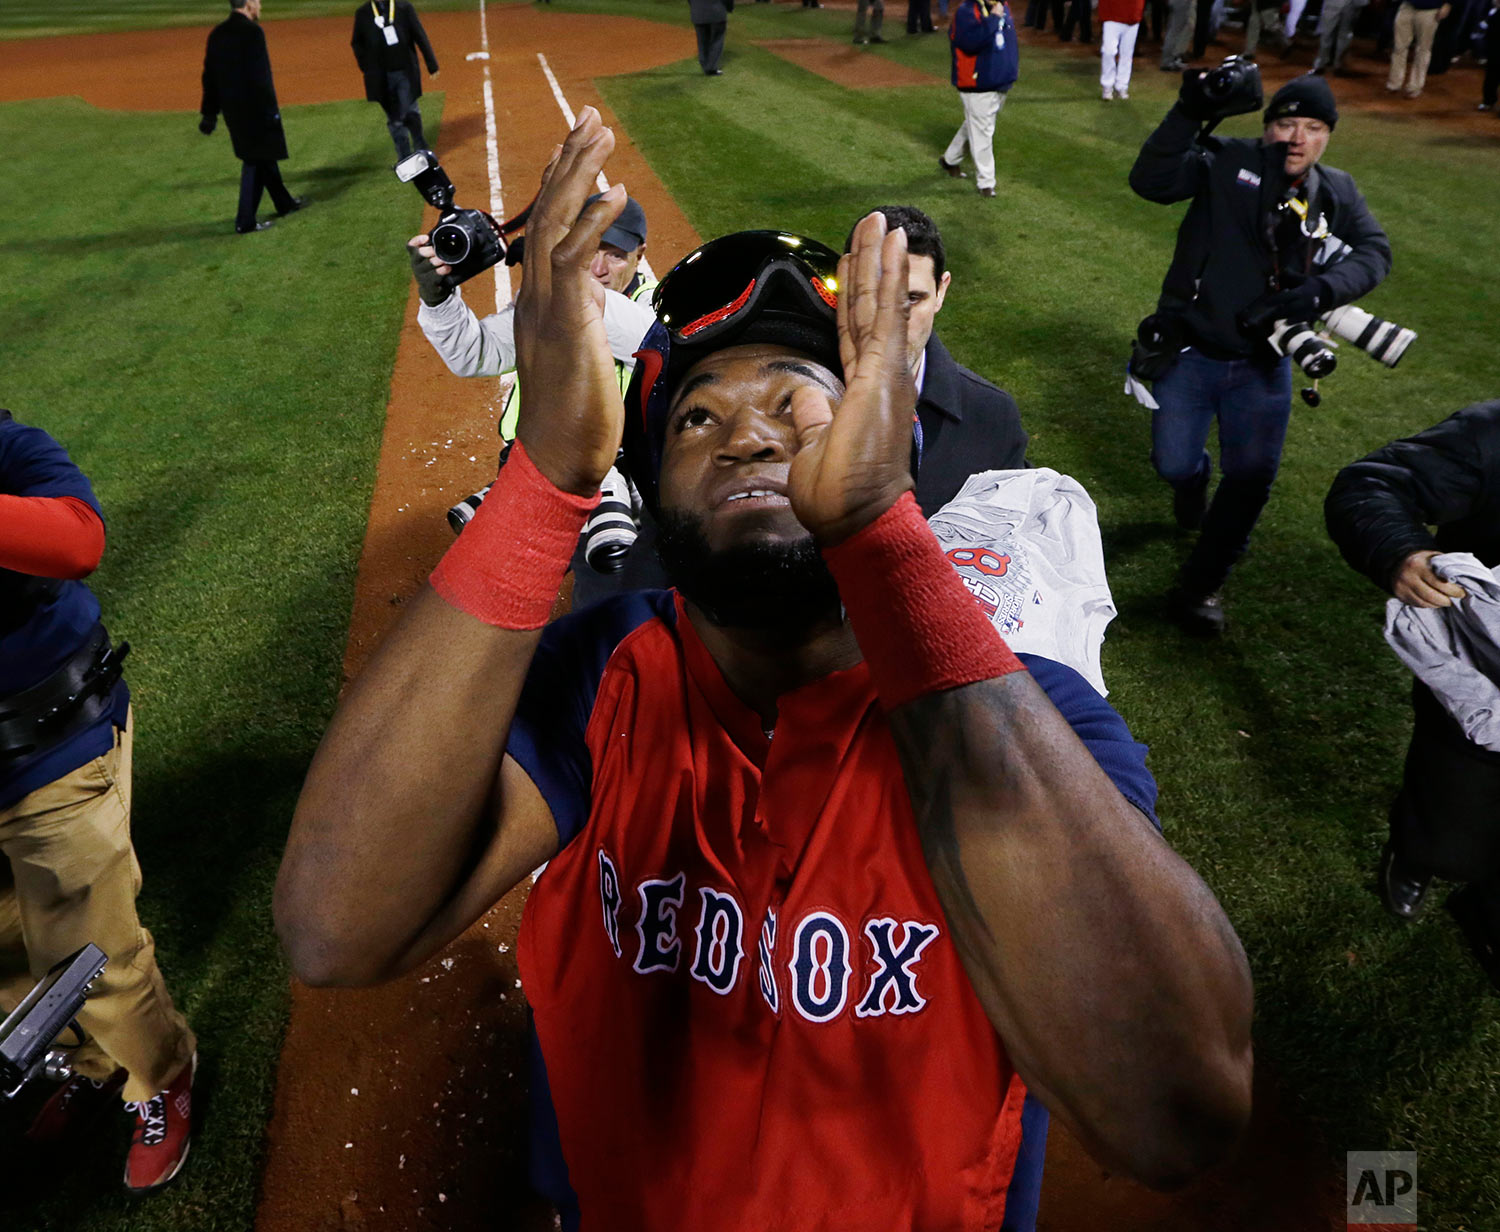 The 20 biggest moments in 20 years of World Series history — AP Photos